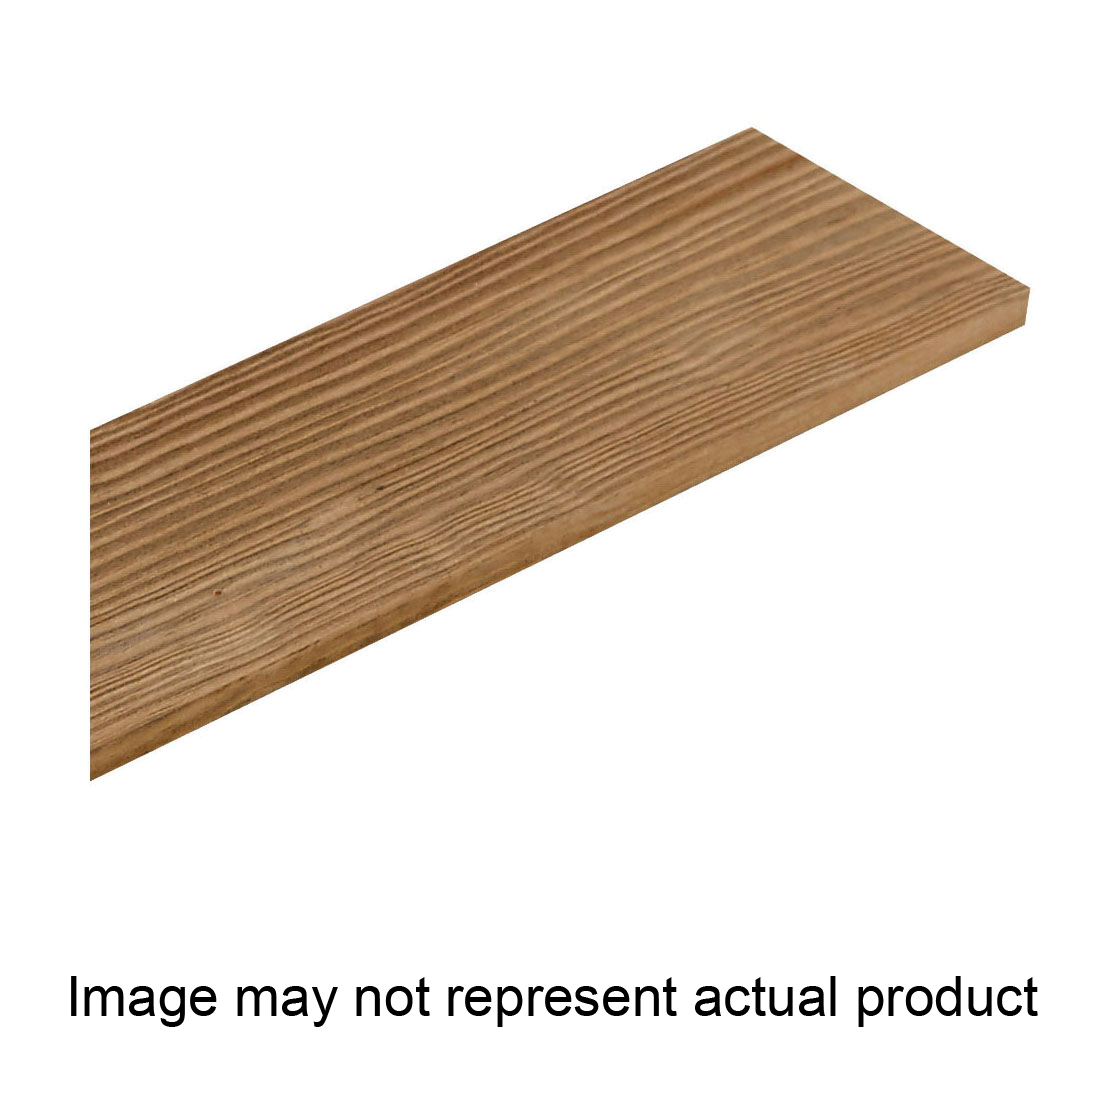 Weld Series TWWESIL Wall Plank, 31-1/2 in L, 2-3/8, 3-9/16, 4-3/4 in W, 10.3 sq-ft Coverage Area, Pine Wood